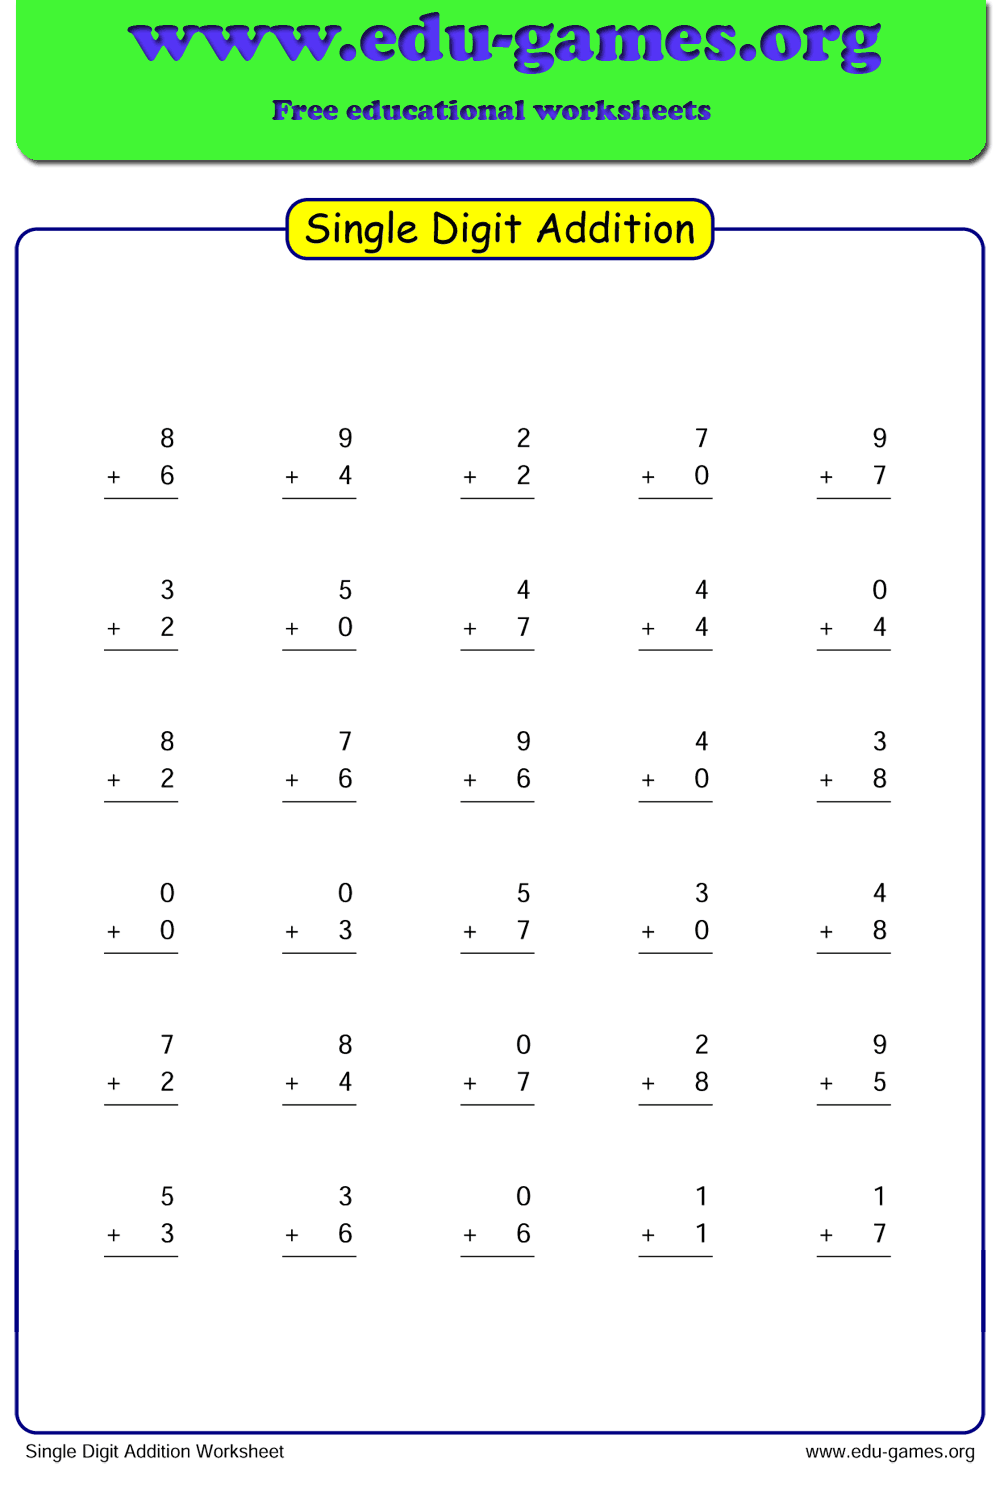 Single Digit Addition Worksheet Generator Grade 1 The Site For Free